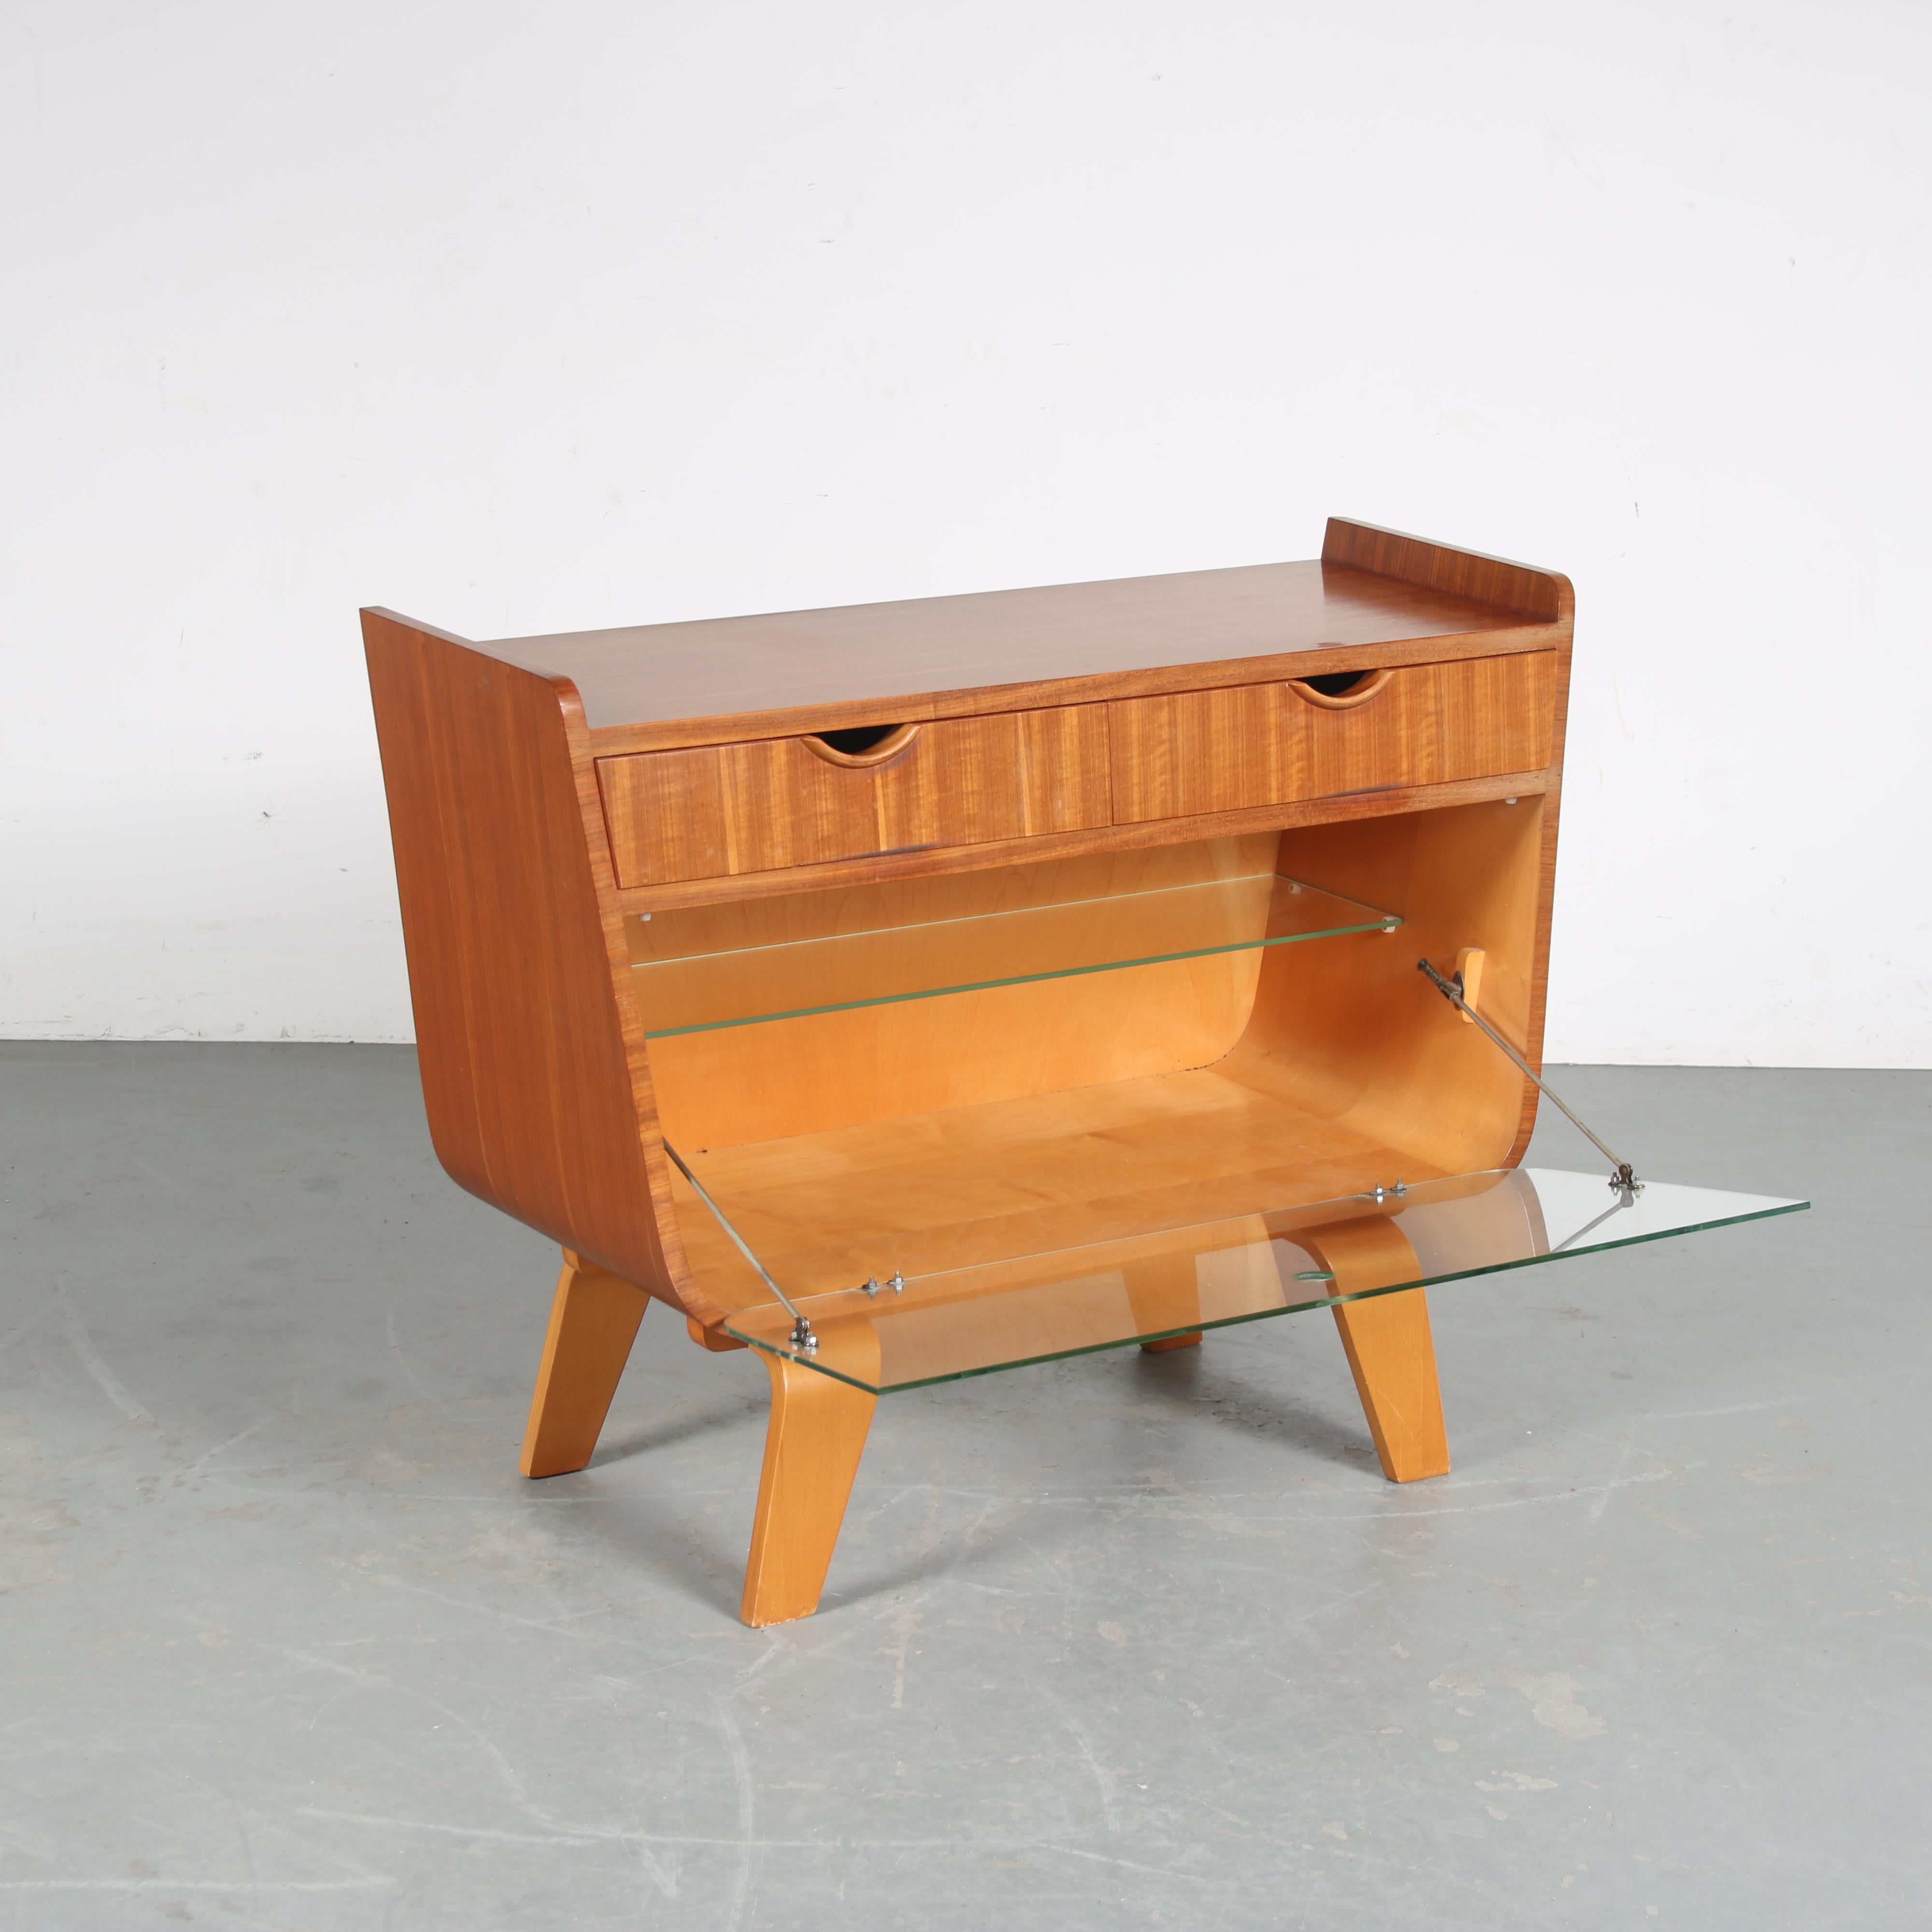 Cor Alons Bar Cabinet for De Boer Gouda, Netherlands, 1950 In Good Condition For Sale In Amsterdam, NL